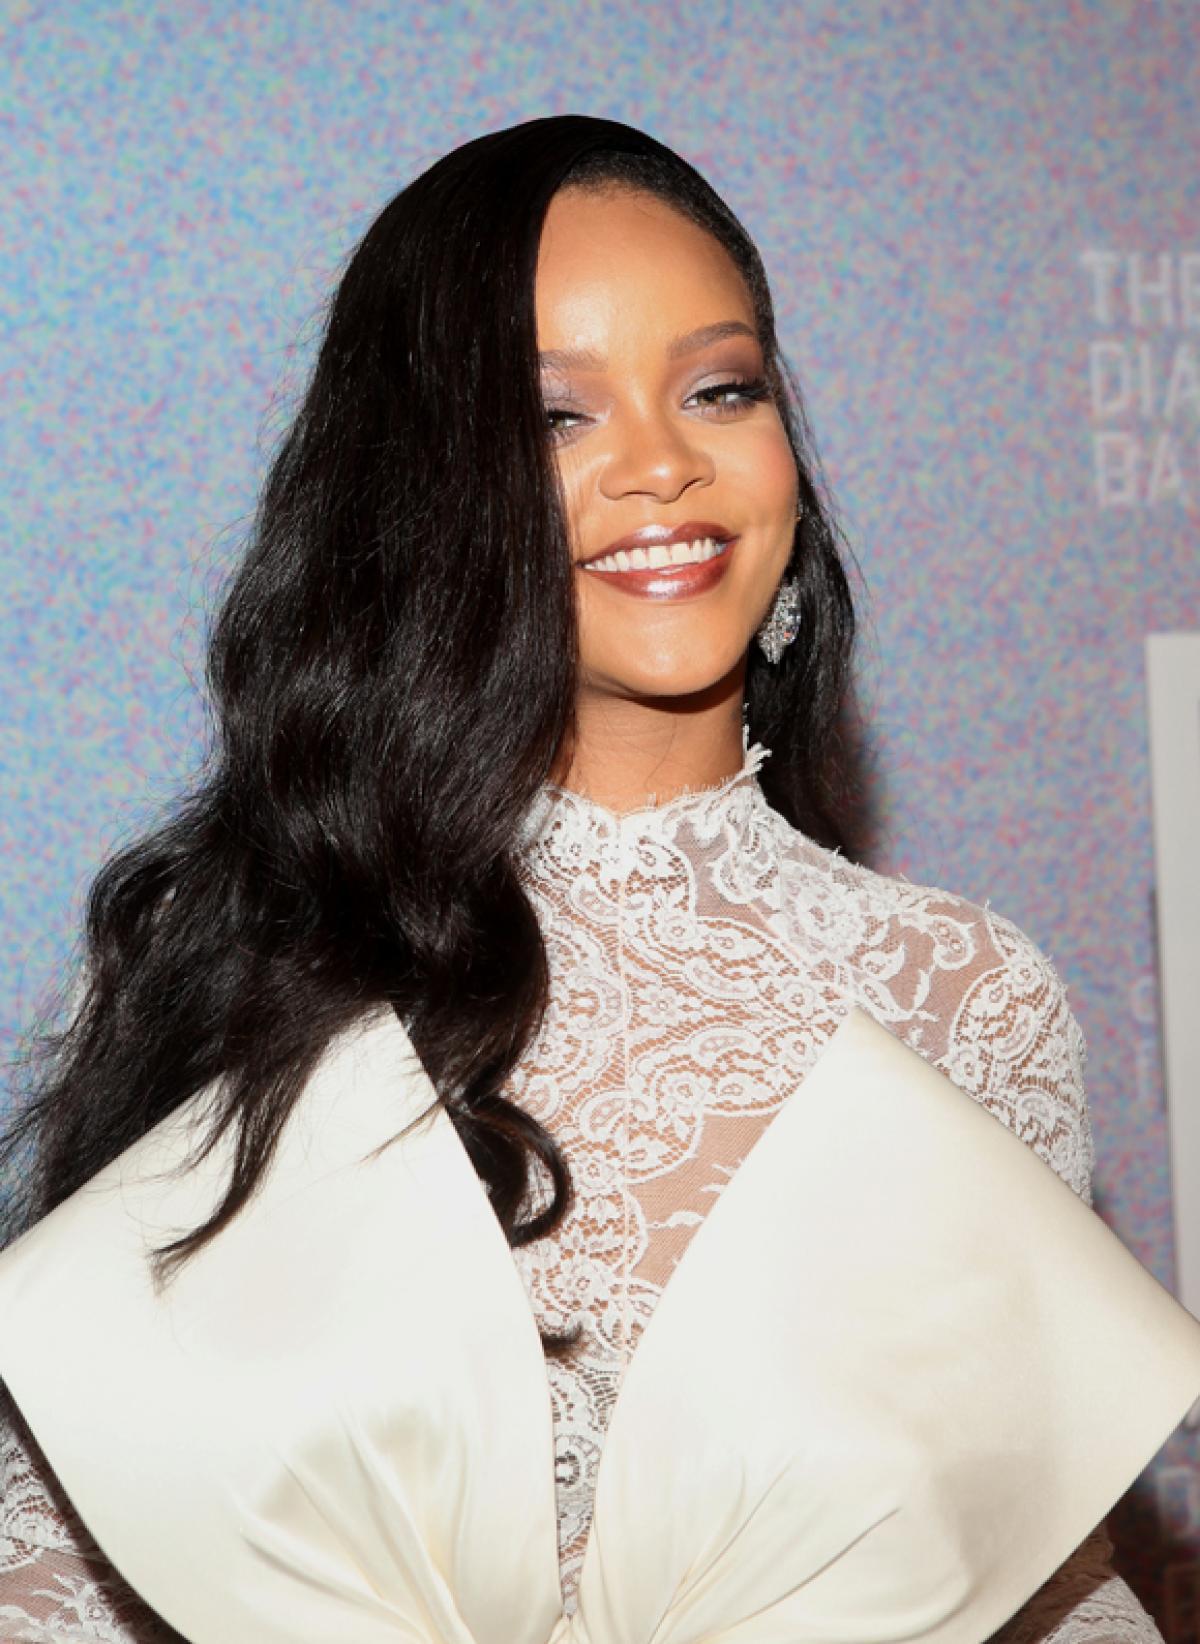 Rihanna and LVMH Are Launching a Luxury Fashion Line